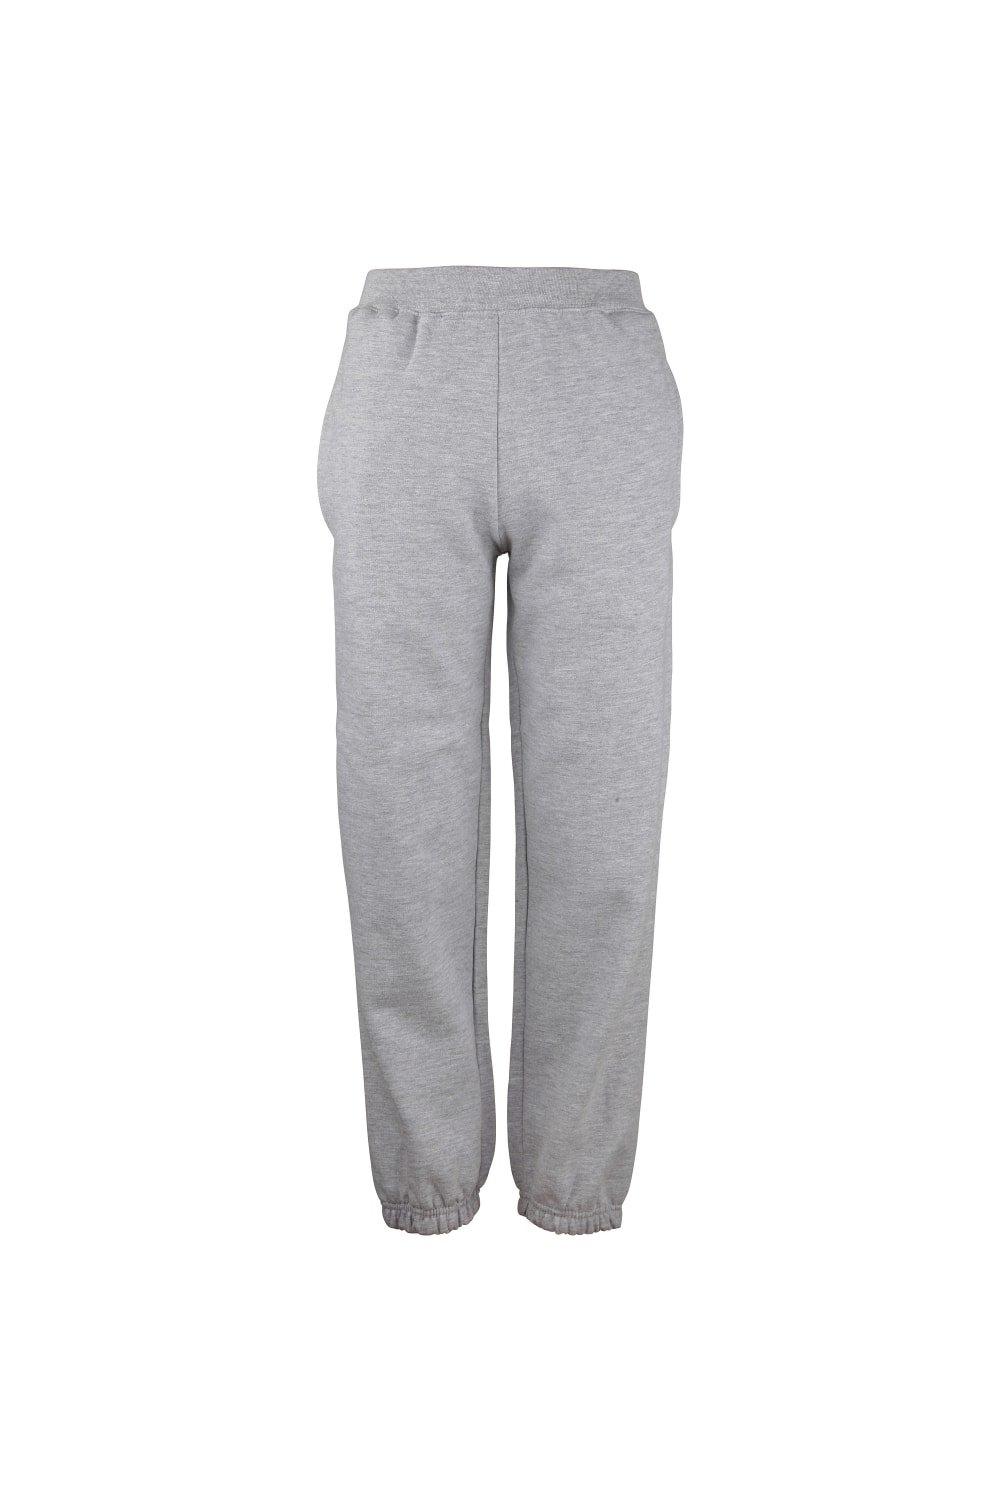 Cuffed Jogpants Jogging Bottoms (Pack of 2)